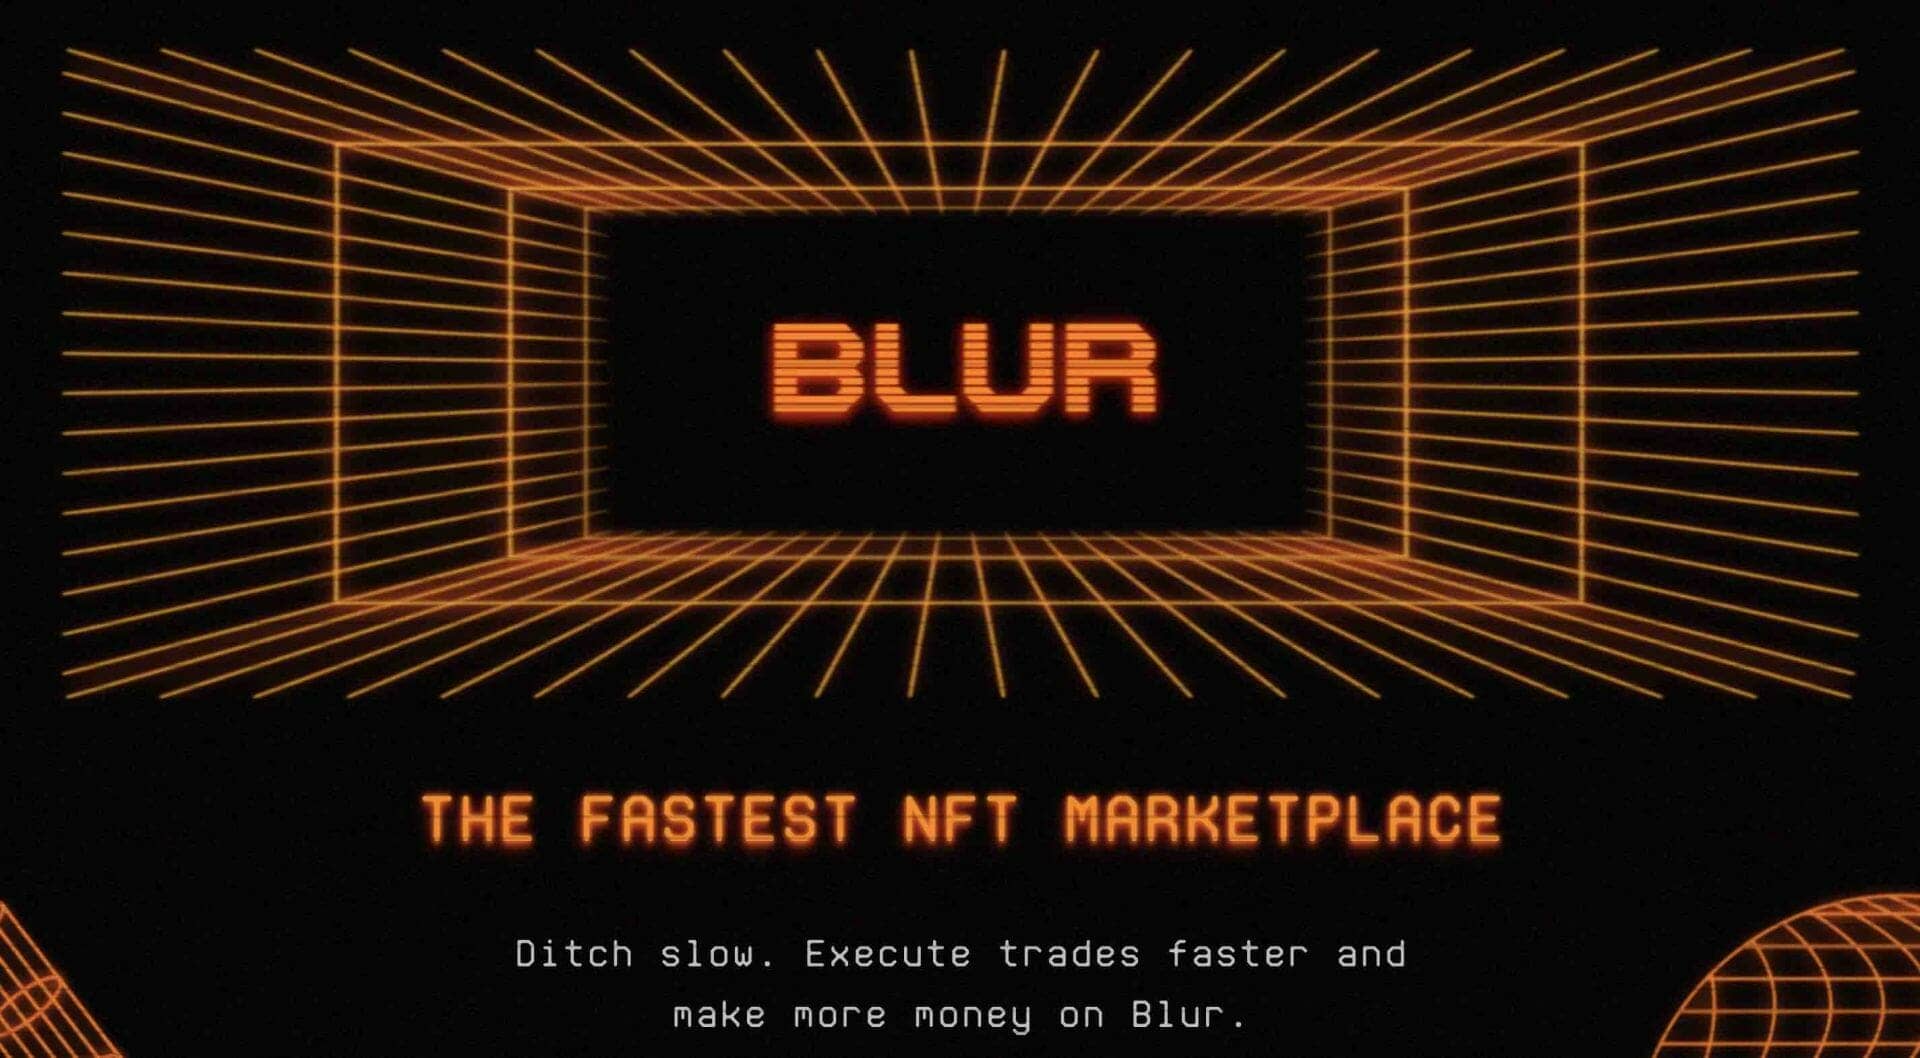 Presentation page of the new professional Blur marketplace.